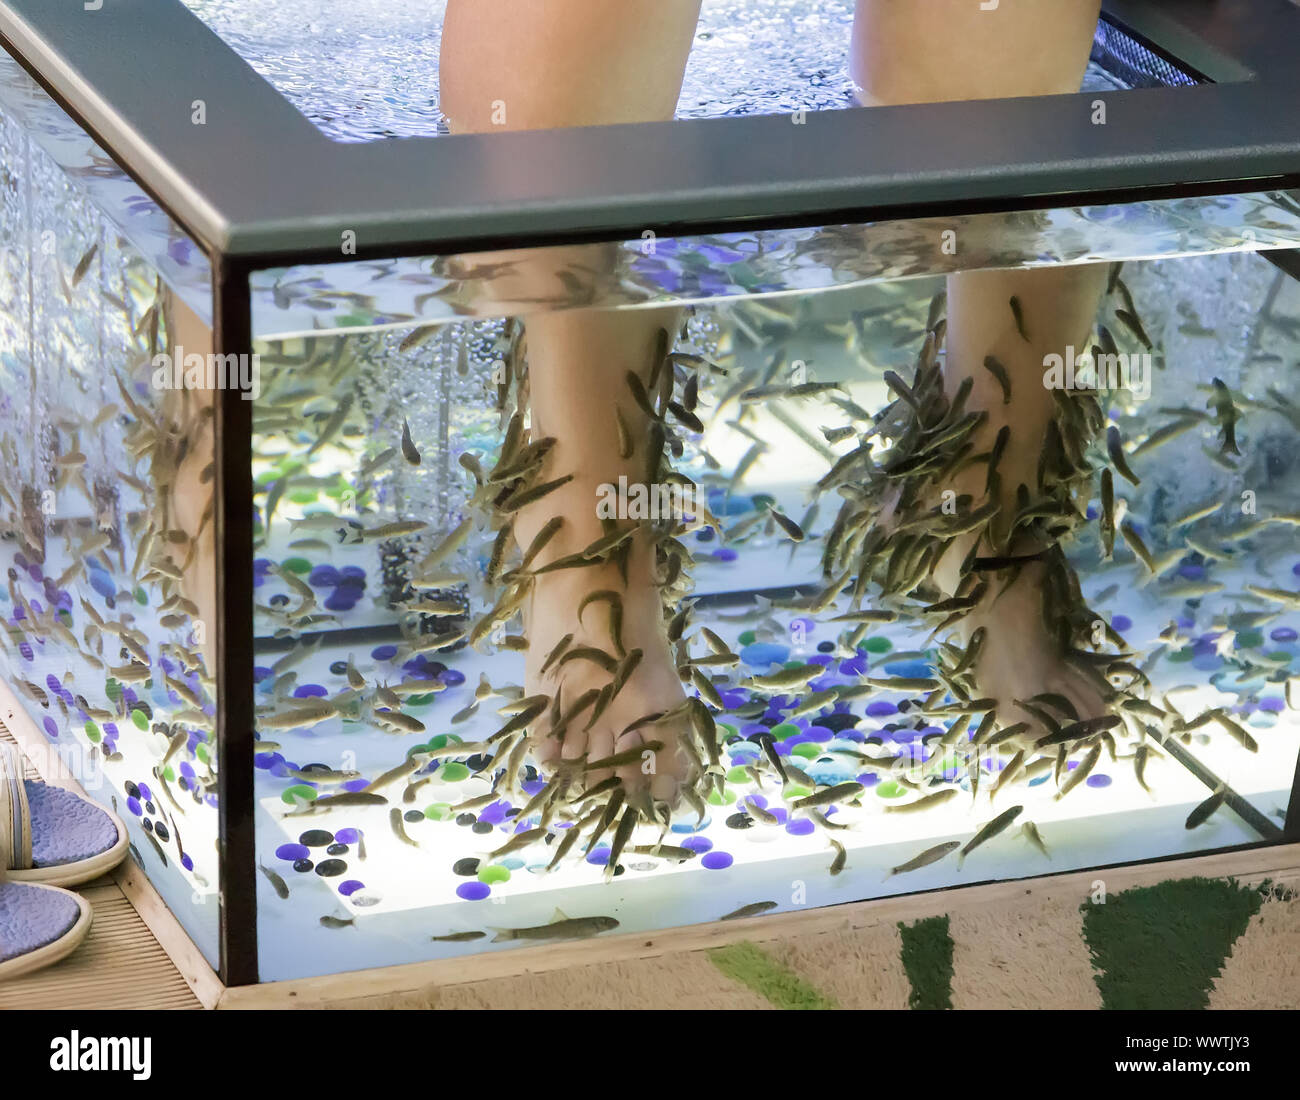 Fish Spa: pedicure and exfoliation on the feet. Stock Photo